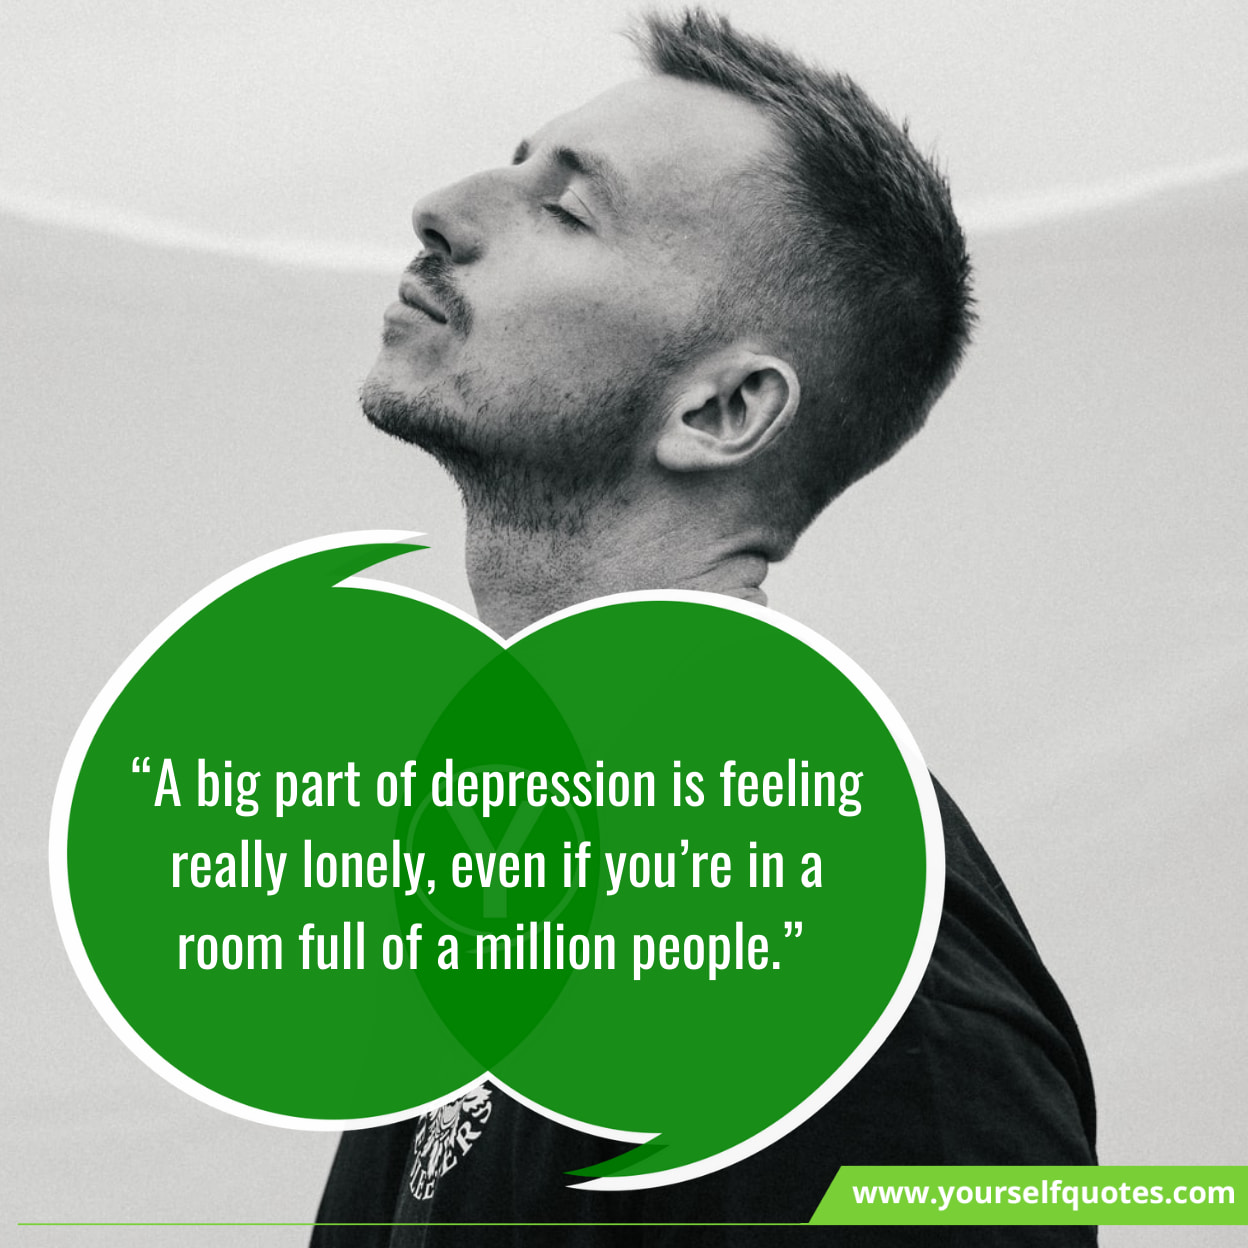 Inspirational Quotes For Depression